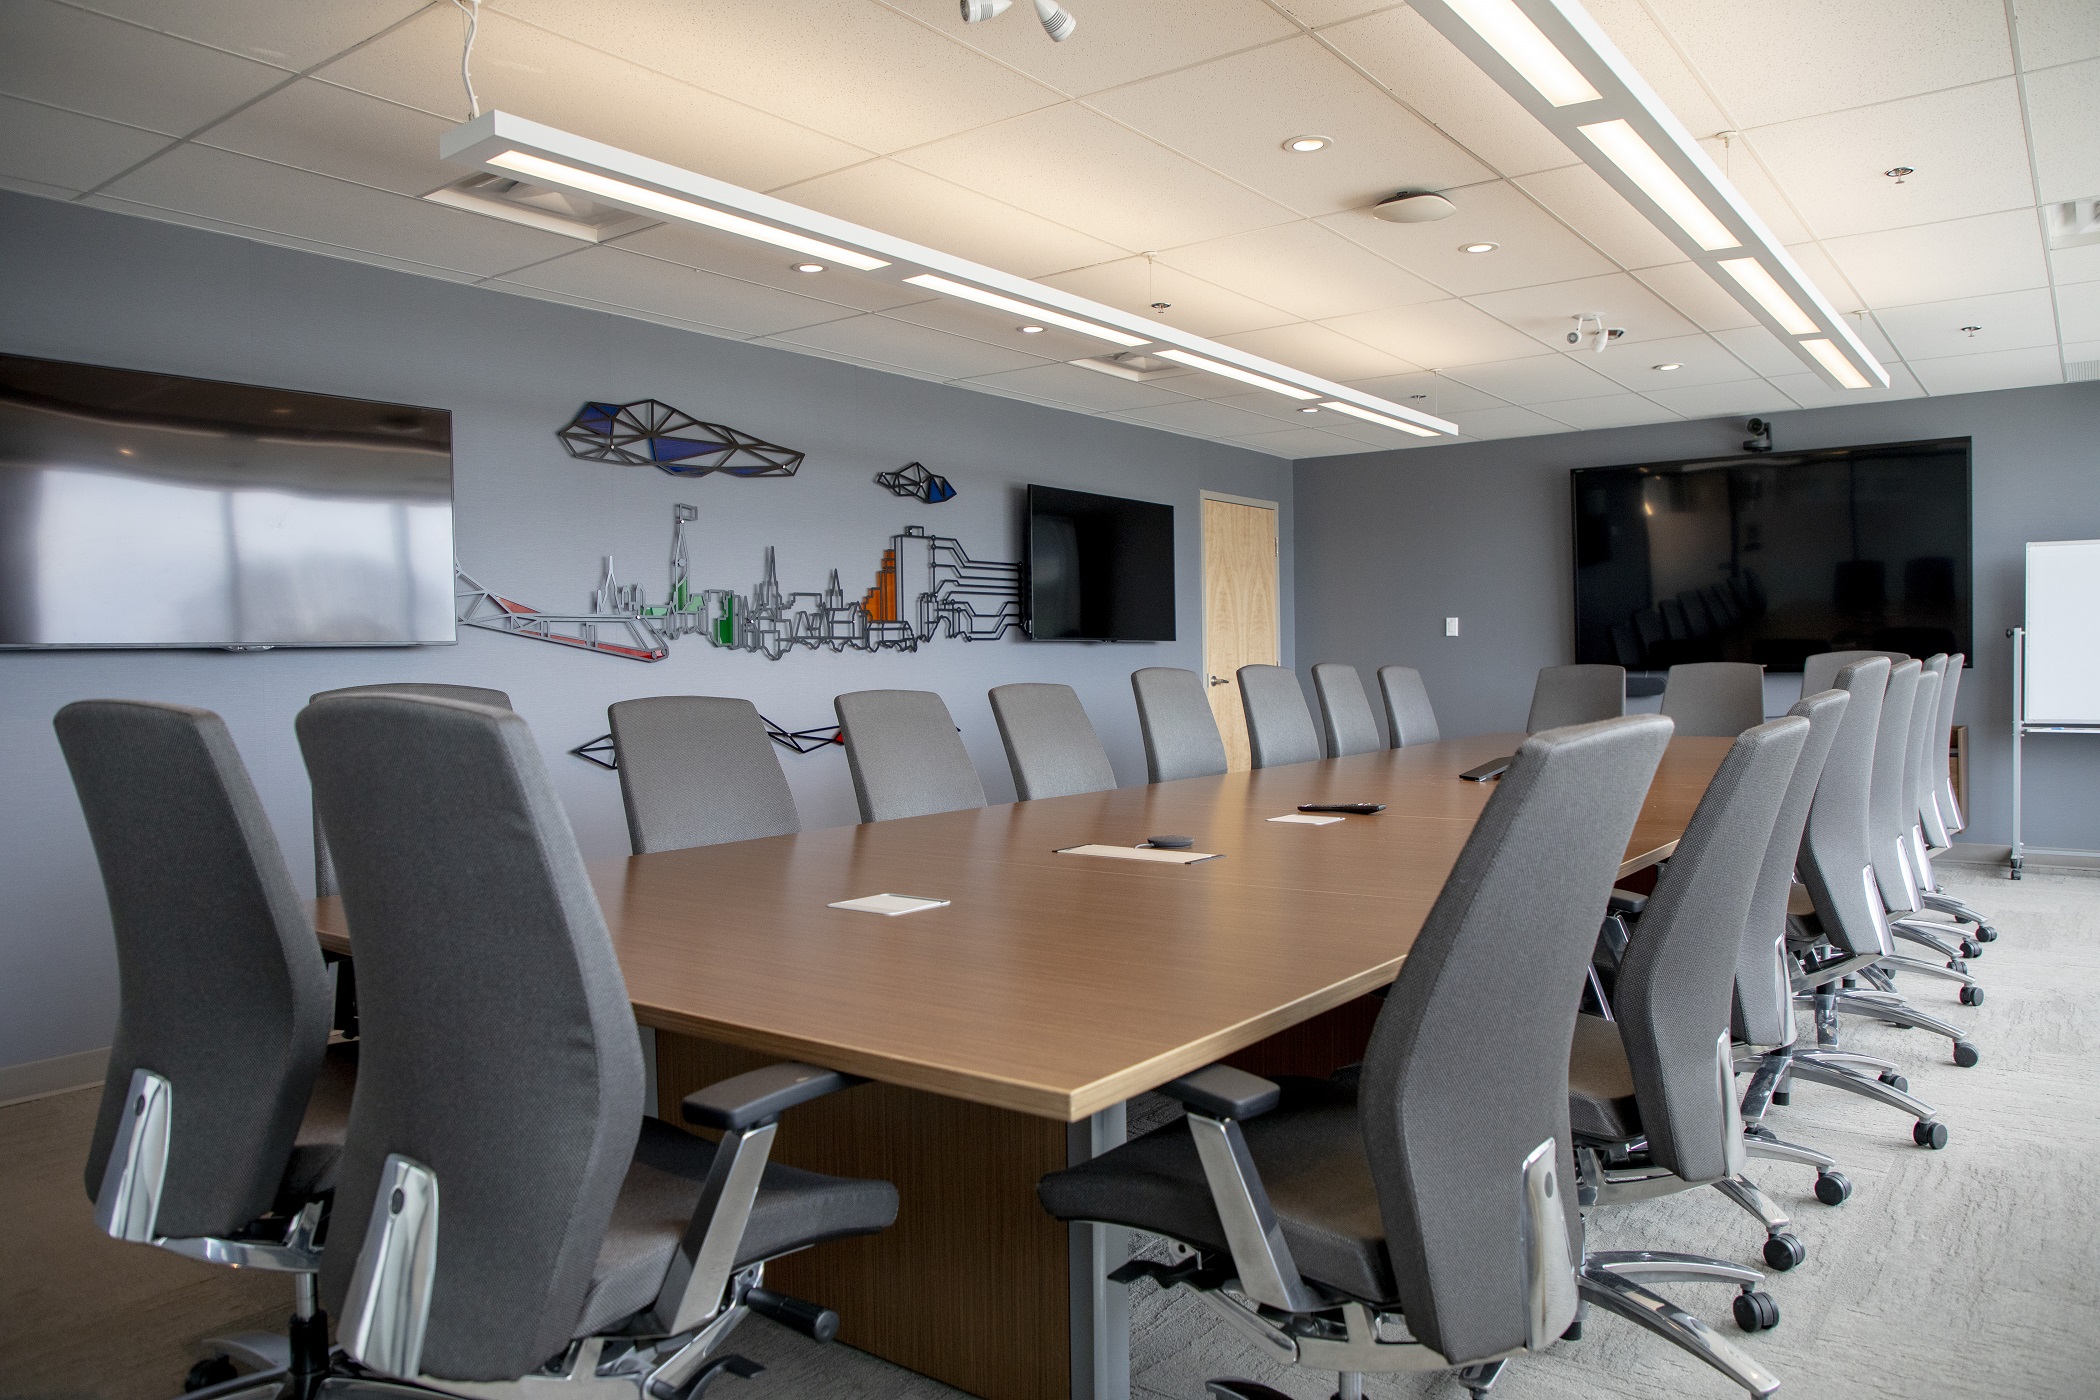 The Executive Boardroom Meeting Room Bayview Yards